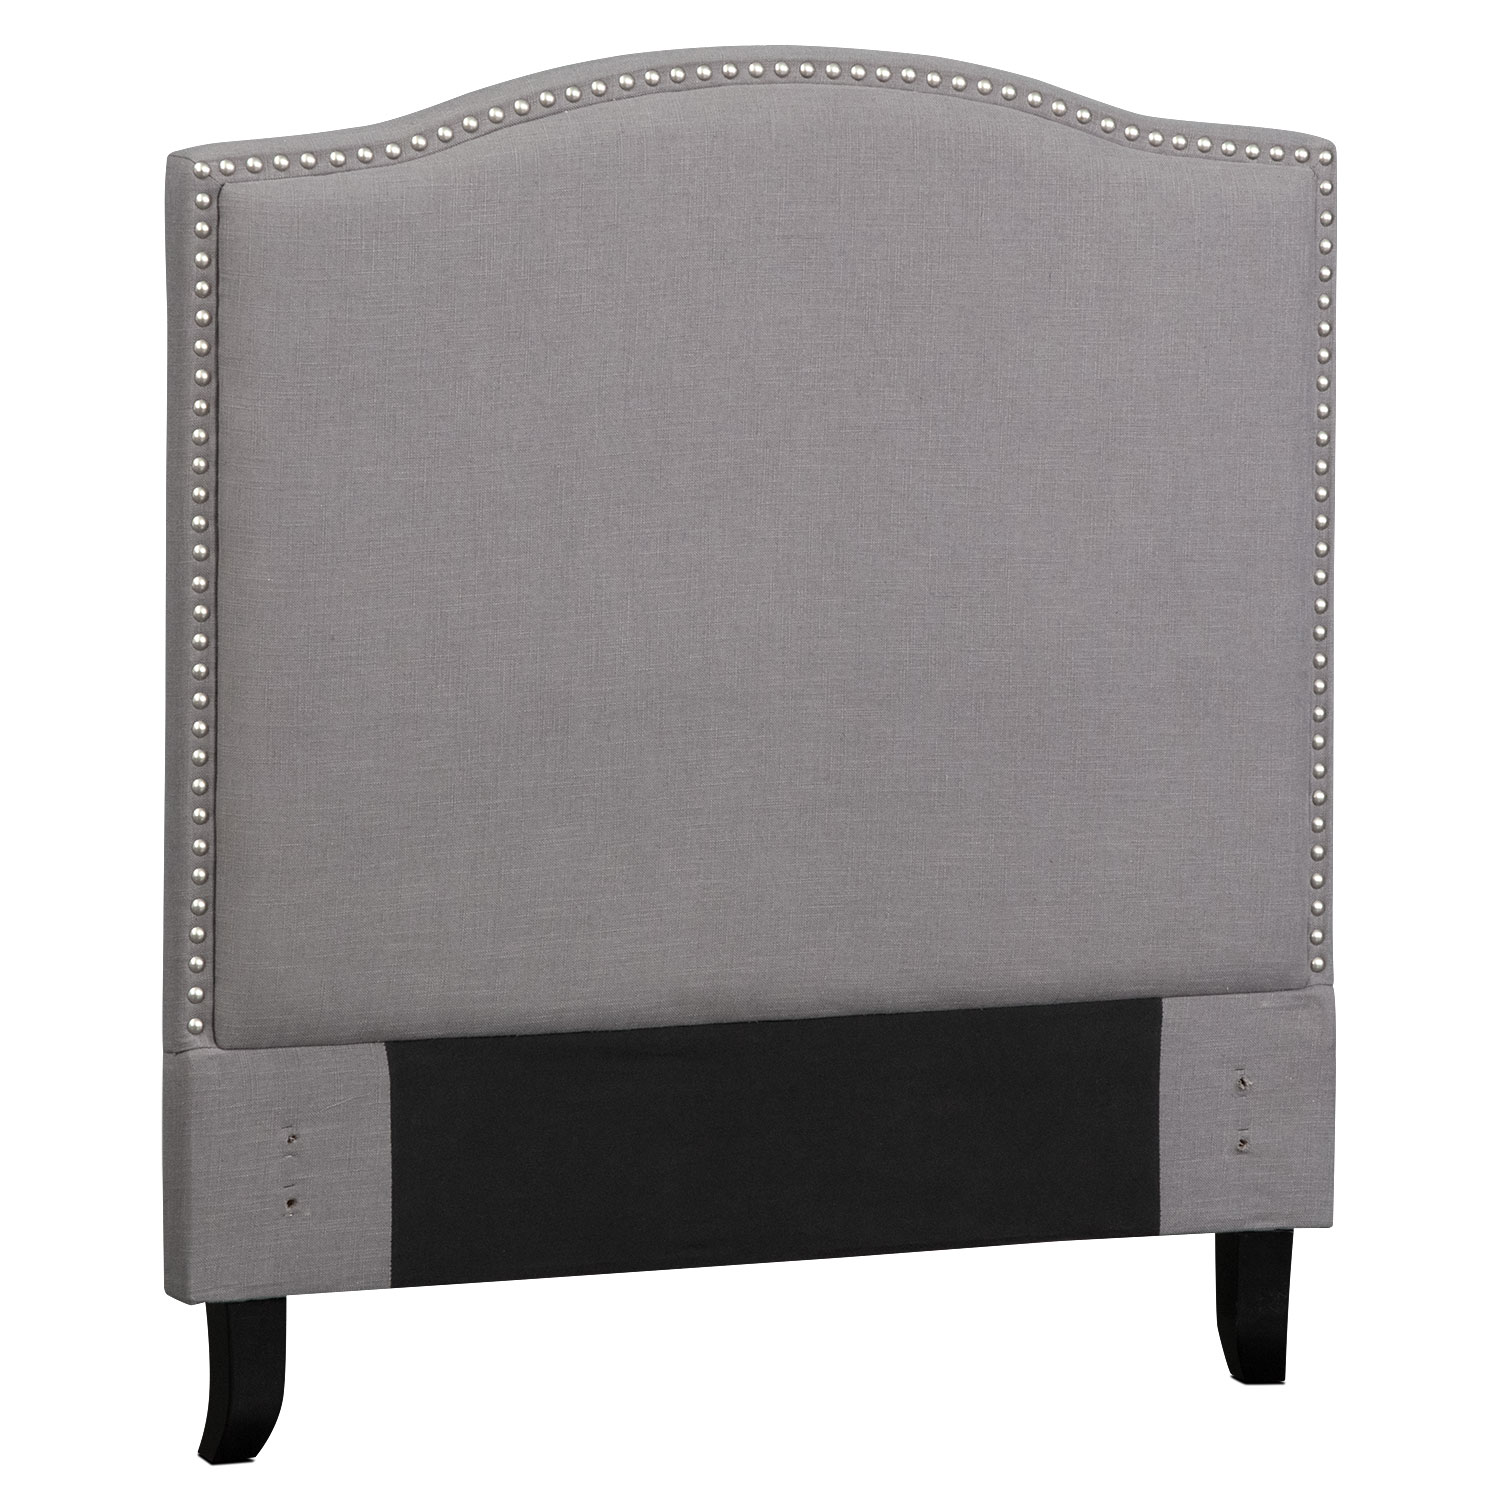 Value City Metal Headboards 51 Images Contemporary Value City